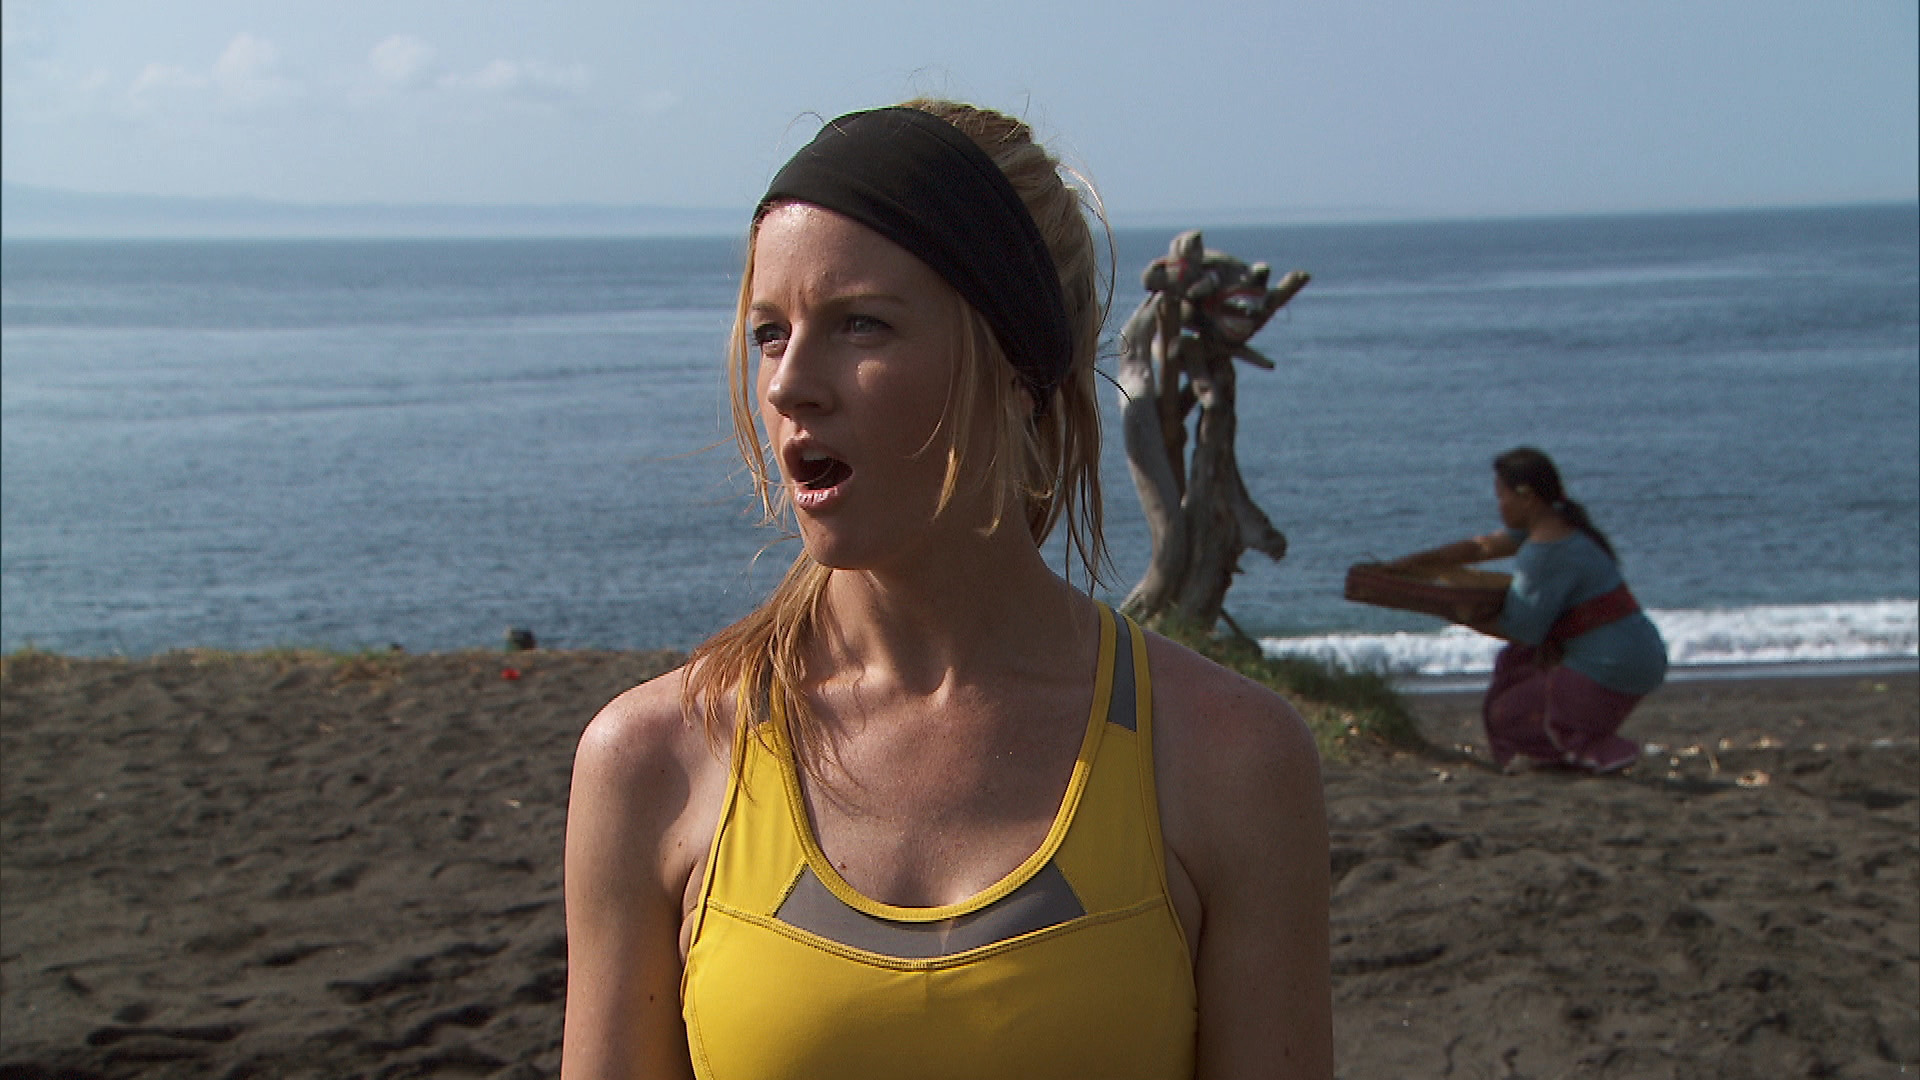 While Burnie works at the Roadblock, Ashley is amazed by racers running up and down the beach.